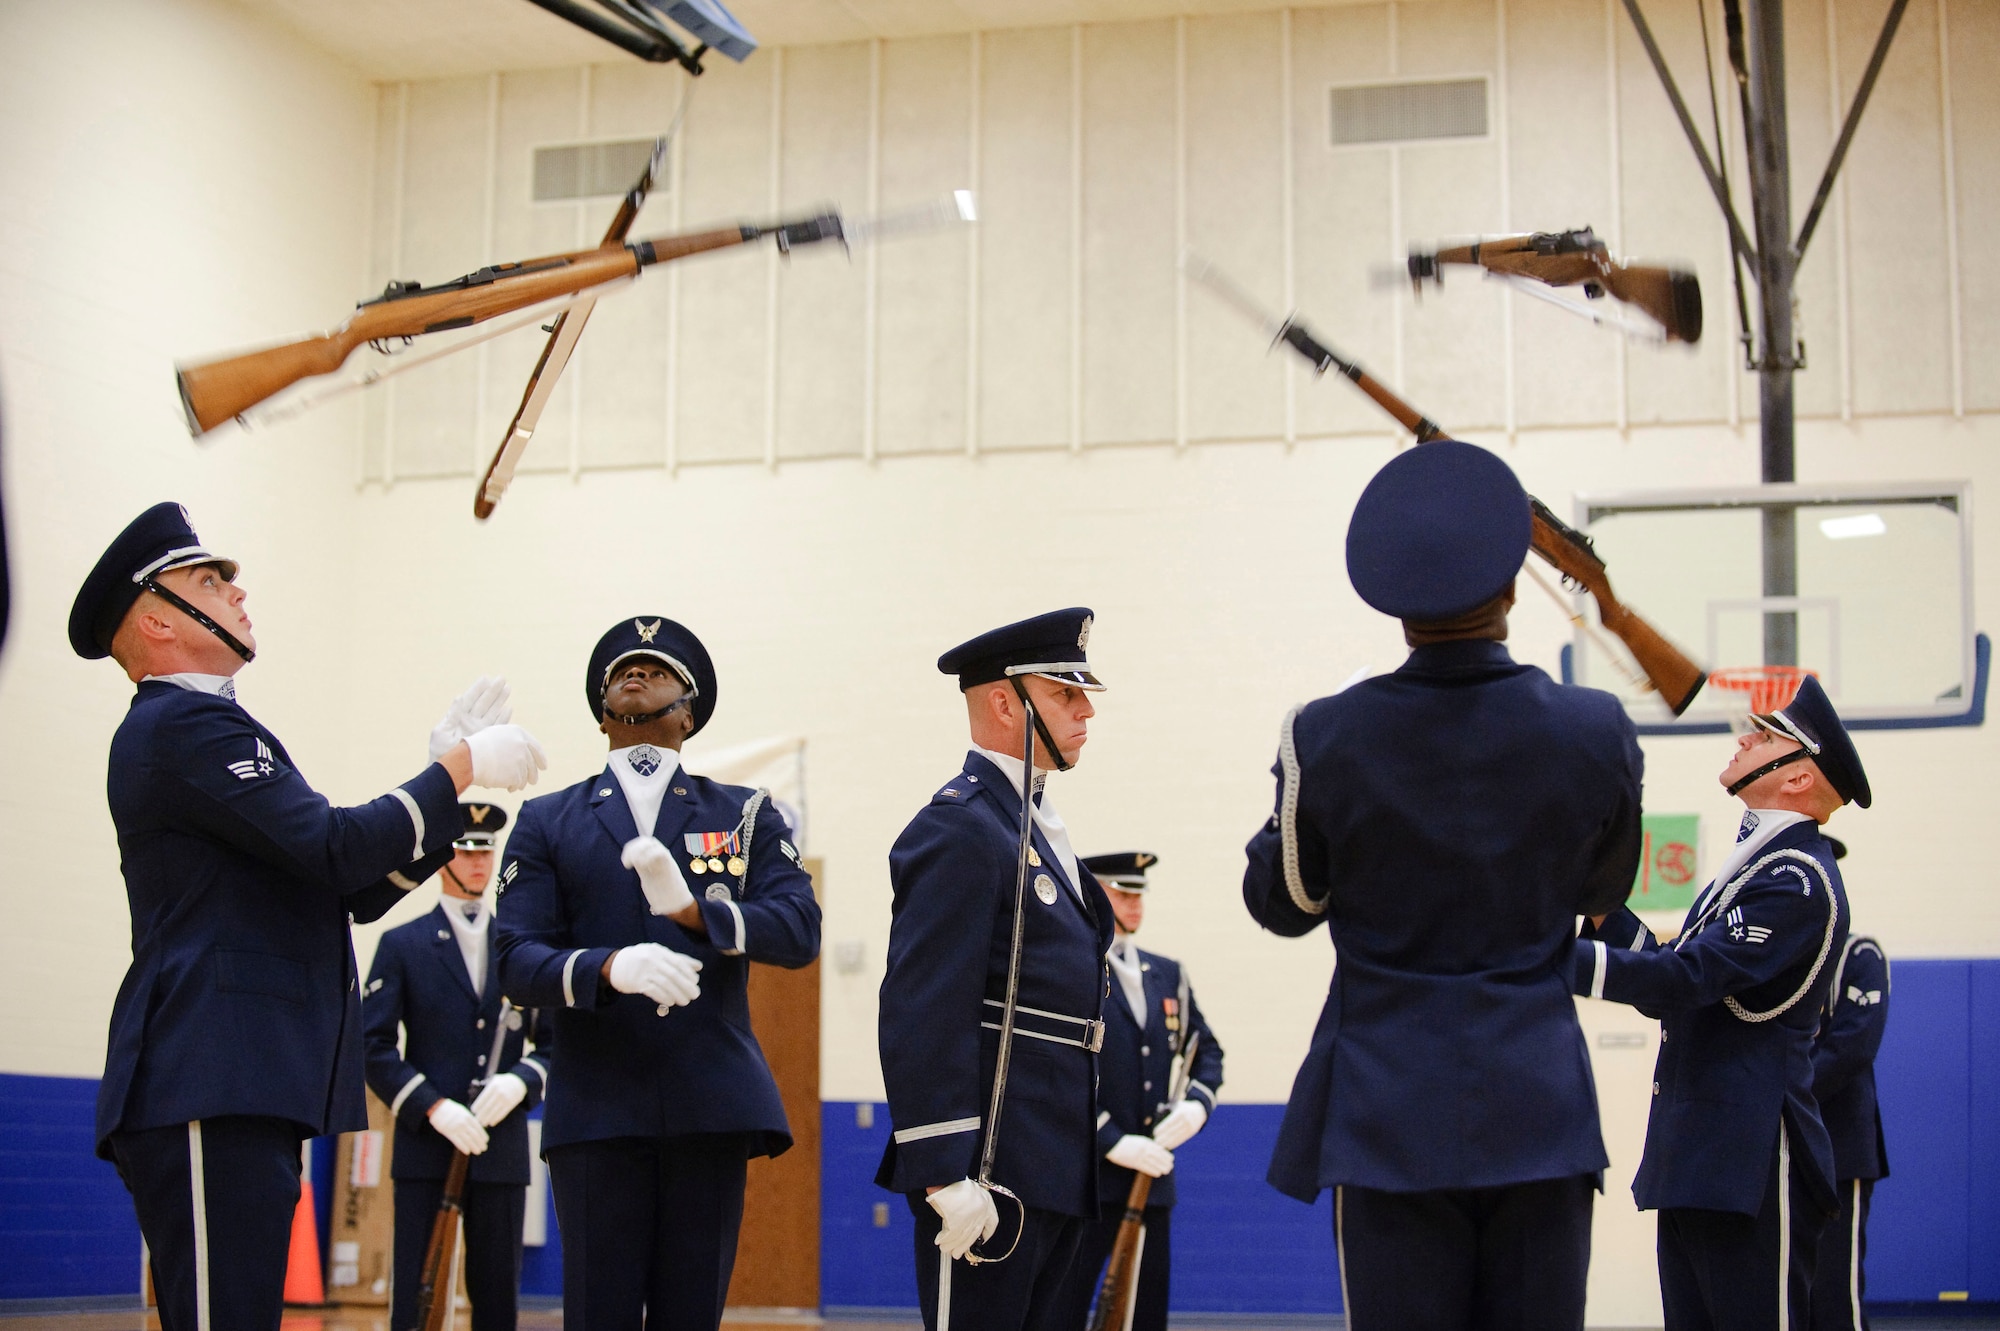 Capt. Michael Fanton, U.S. Air Force Honor Guard Drill Team commander and his four-man team display Air Force precision and professionalism during a performance for the Ro-Hawks of Randolph High School during an assembly Nov. 2. (U.S. Air Force photo/Steve Thurow)